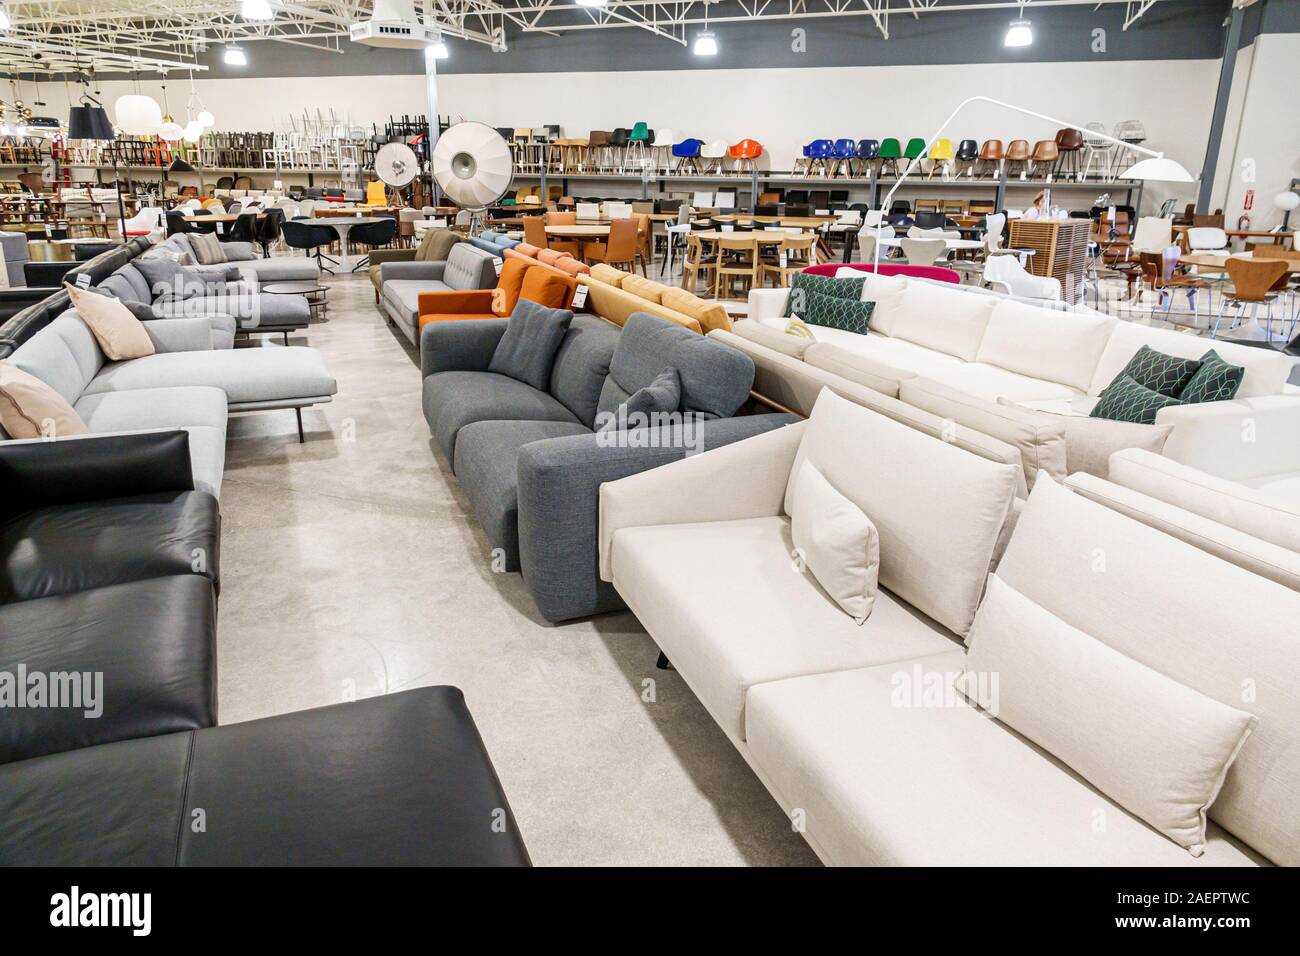 Vero Beach Florida,Vero Beach Outlets,outdoor outlet mall,shopping,Design Within Reach,store,modern furniture company,sofa couch,FL190920056 Stock Photo